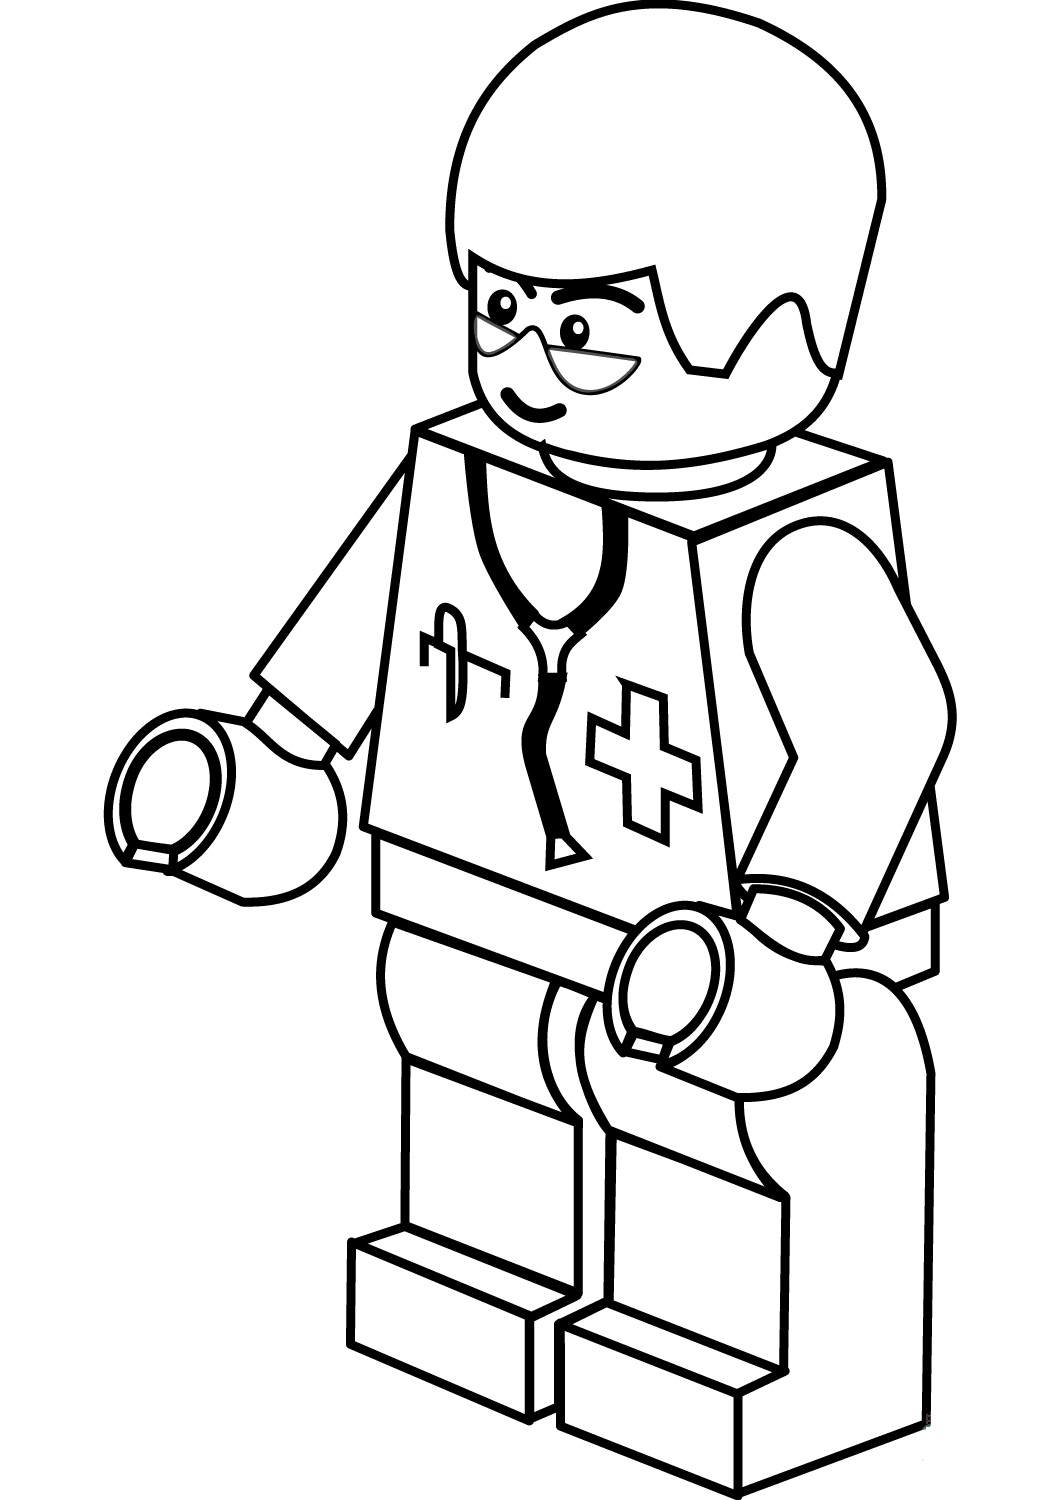 Lego Harry Potter Coloring Page - Free Coloring Pages Online